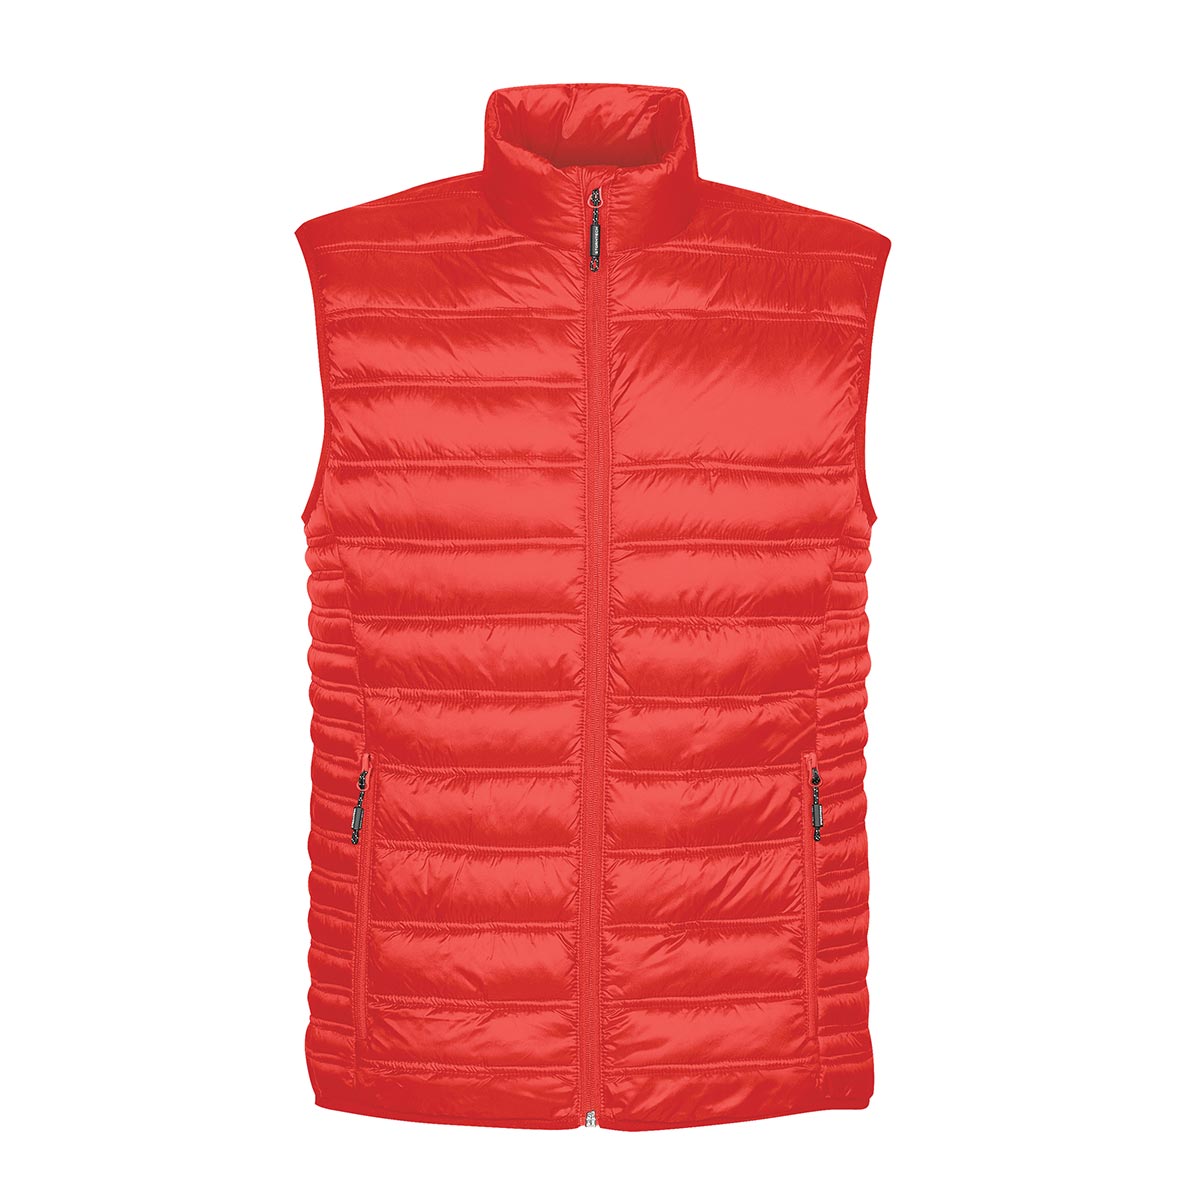 PFV-2 Men's Gravity Thermal Vest custom embroidered or printed with your  logo.